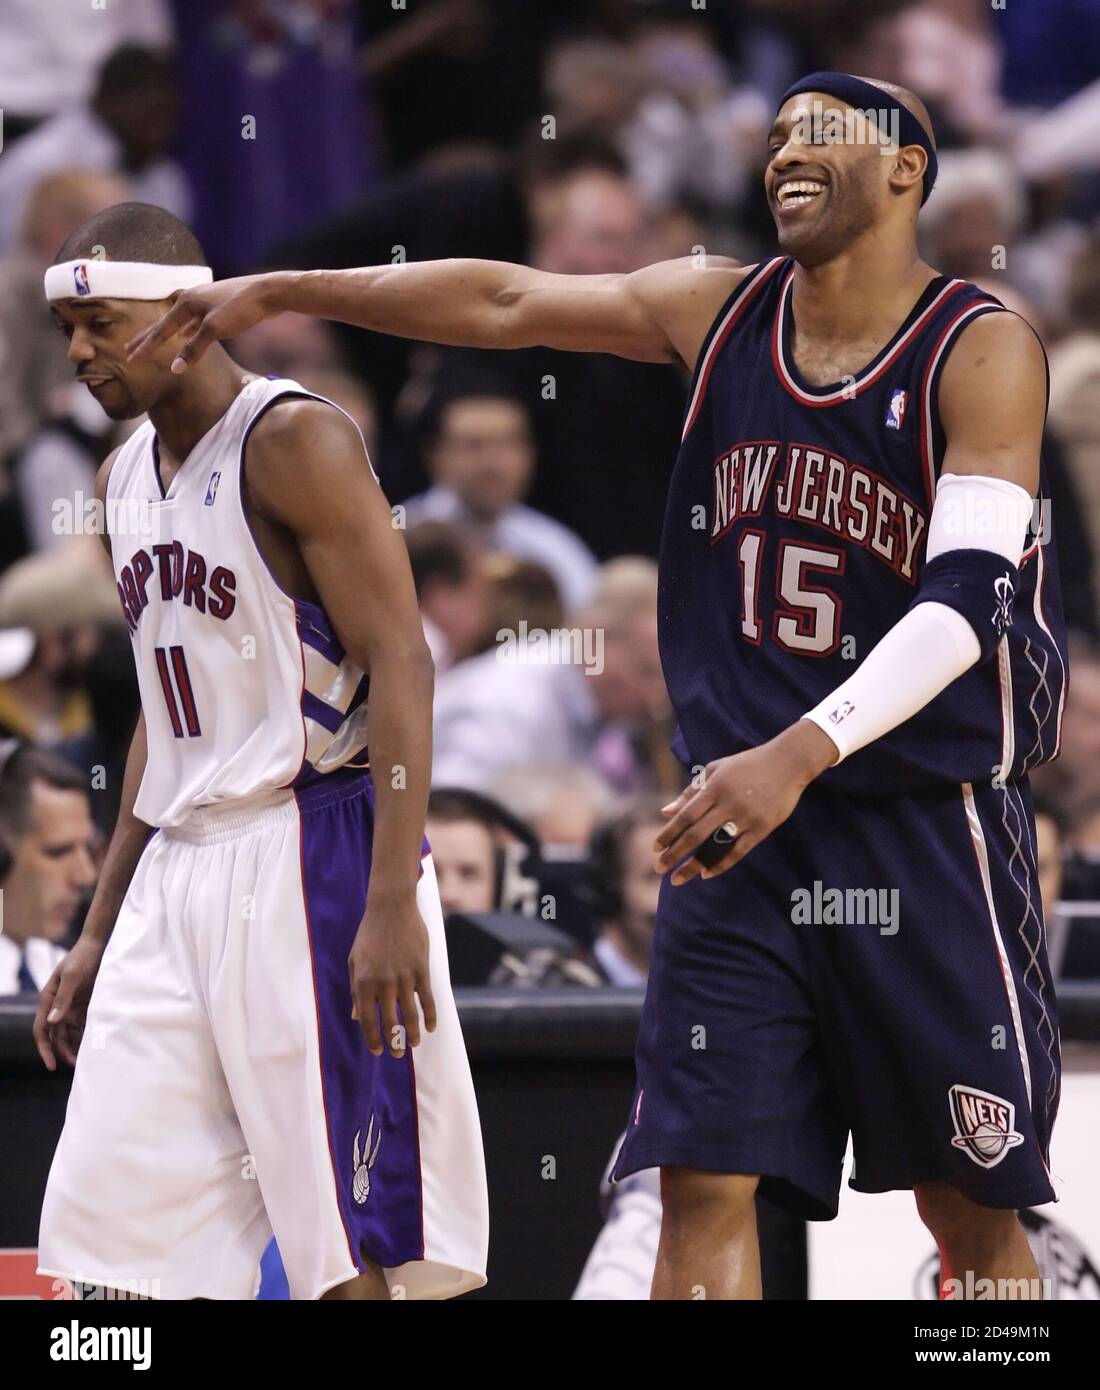 New Jersey Nets guard Vince Carter (R) playfully hits Toronto Raptors guard  Rafer Alston as they leave the floor at half time in the NBA game in  Toronto, April 15, 2005. This